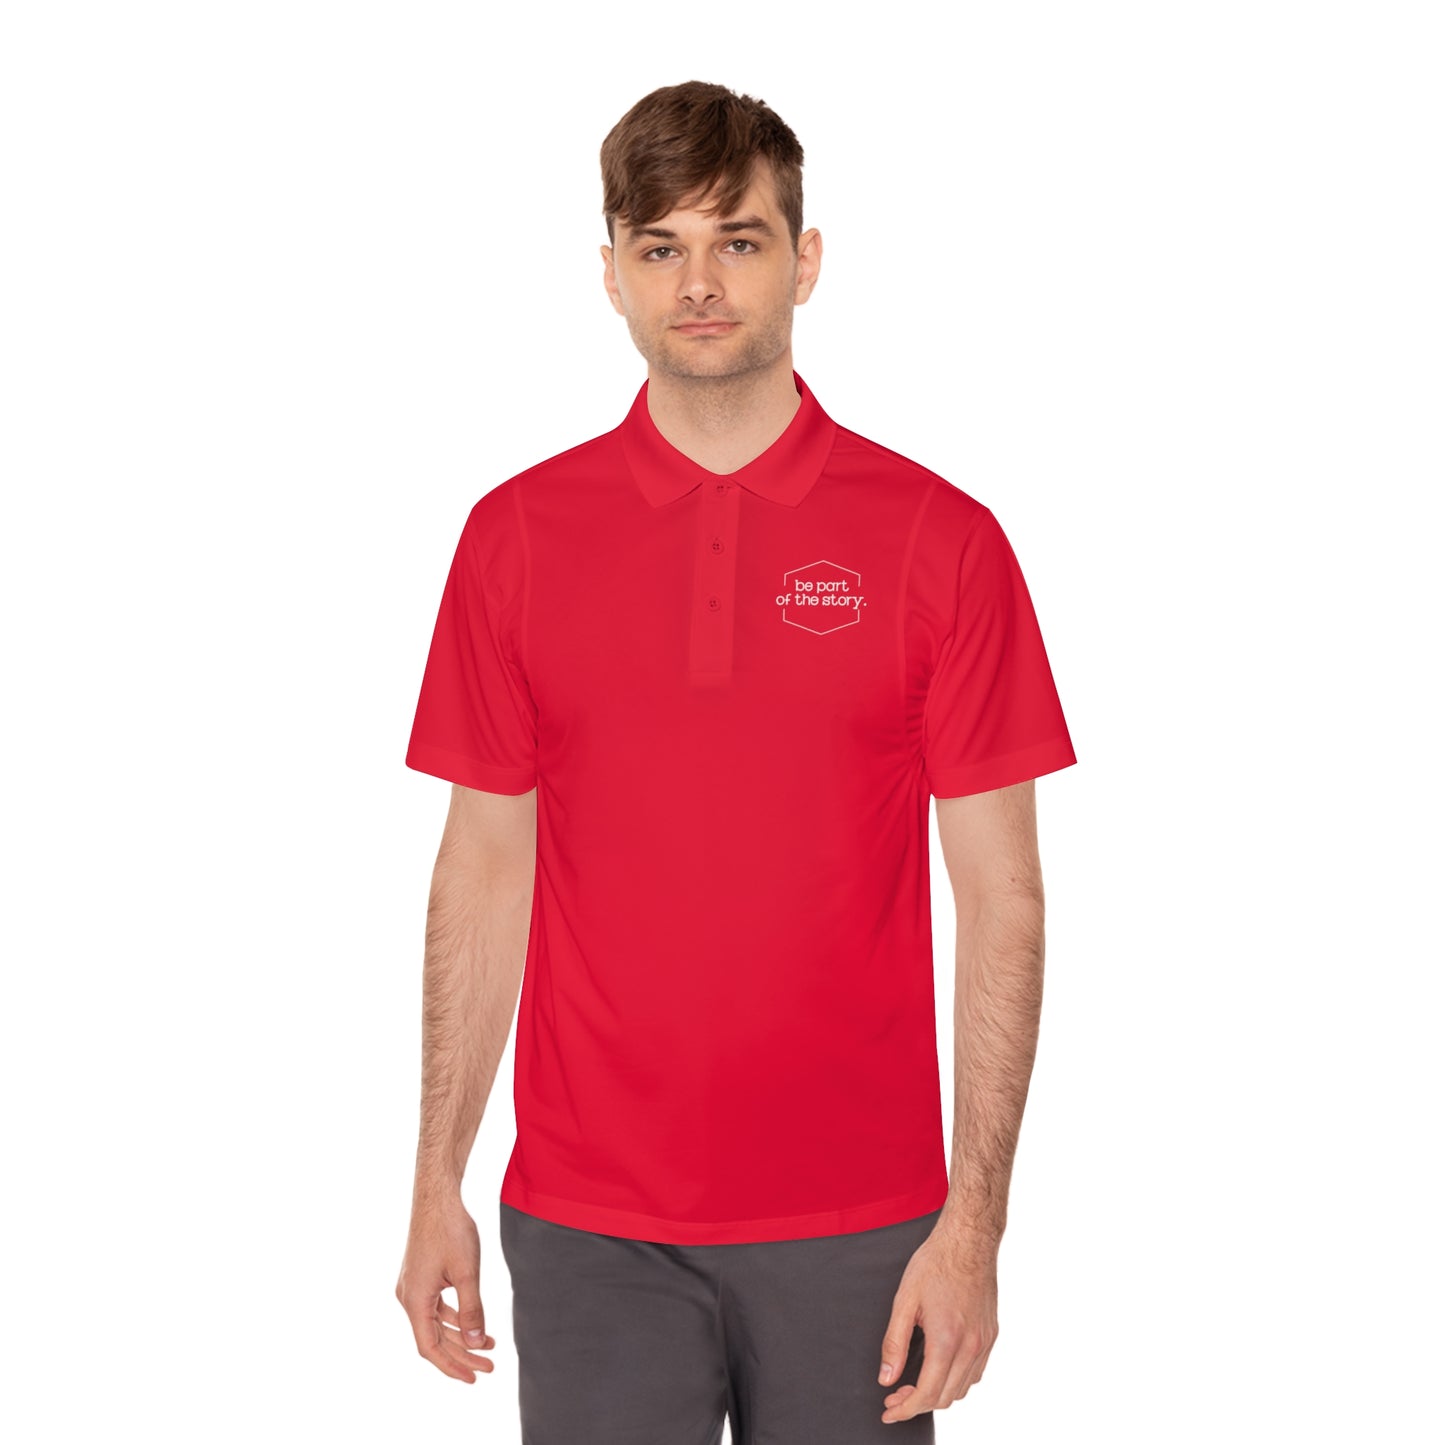 Be Part of the Story English Men's Sport Polo Shirt